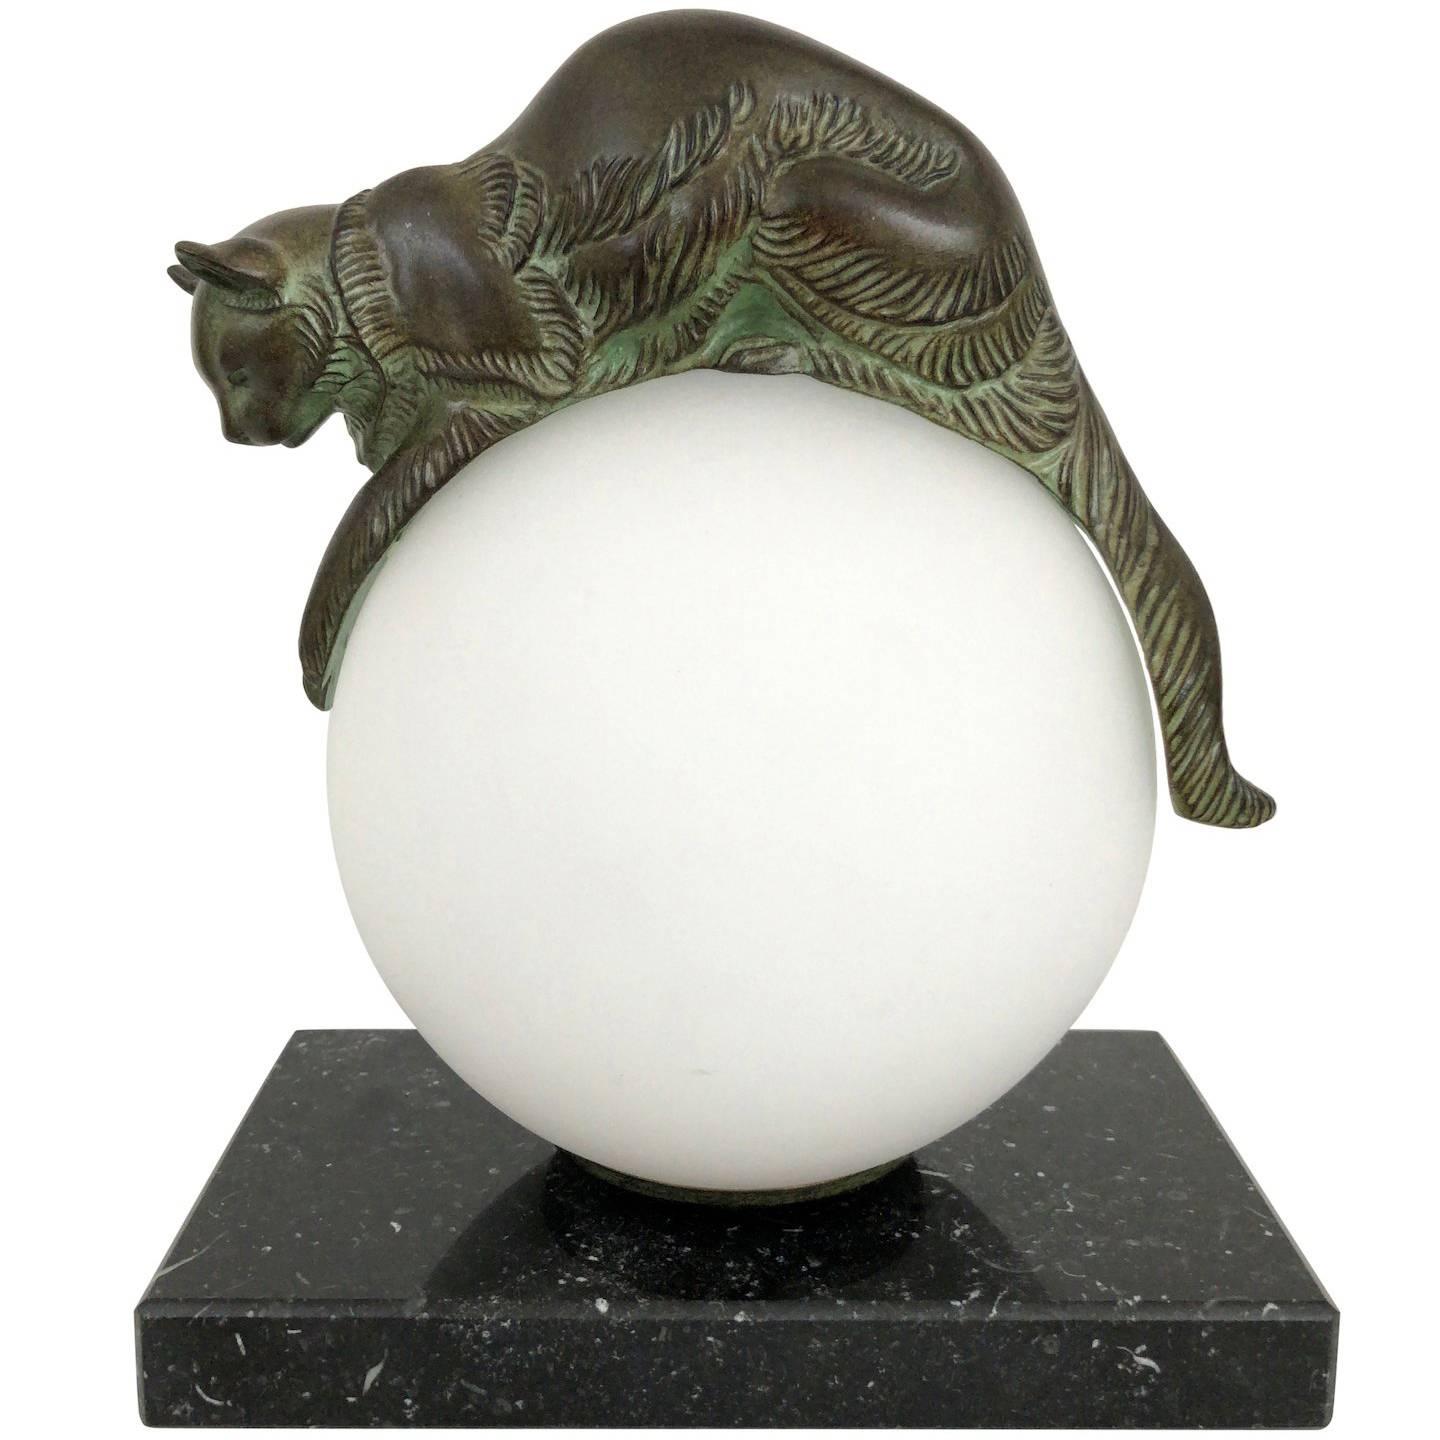 Table Lamp, Equilibre, Cat on Glass Ball, by Gaillard, Original Max Le Verrier